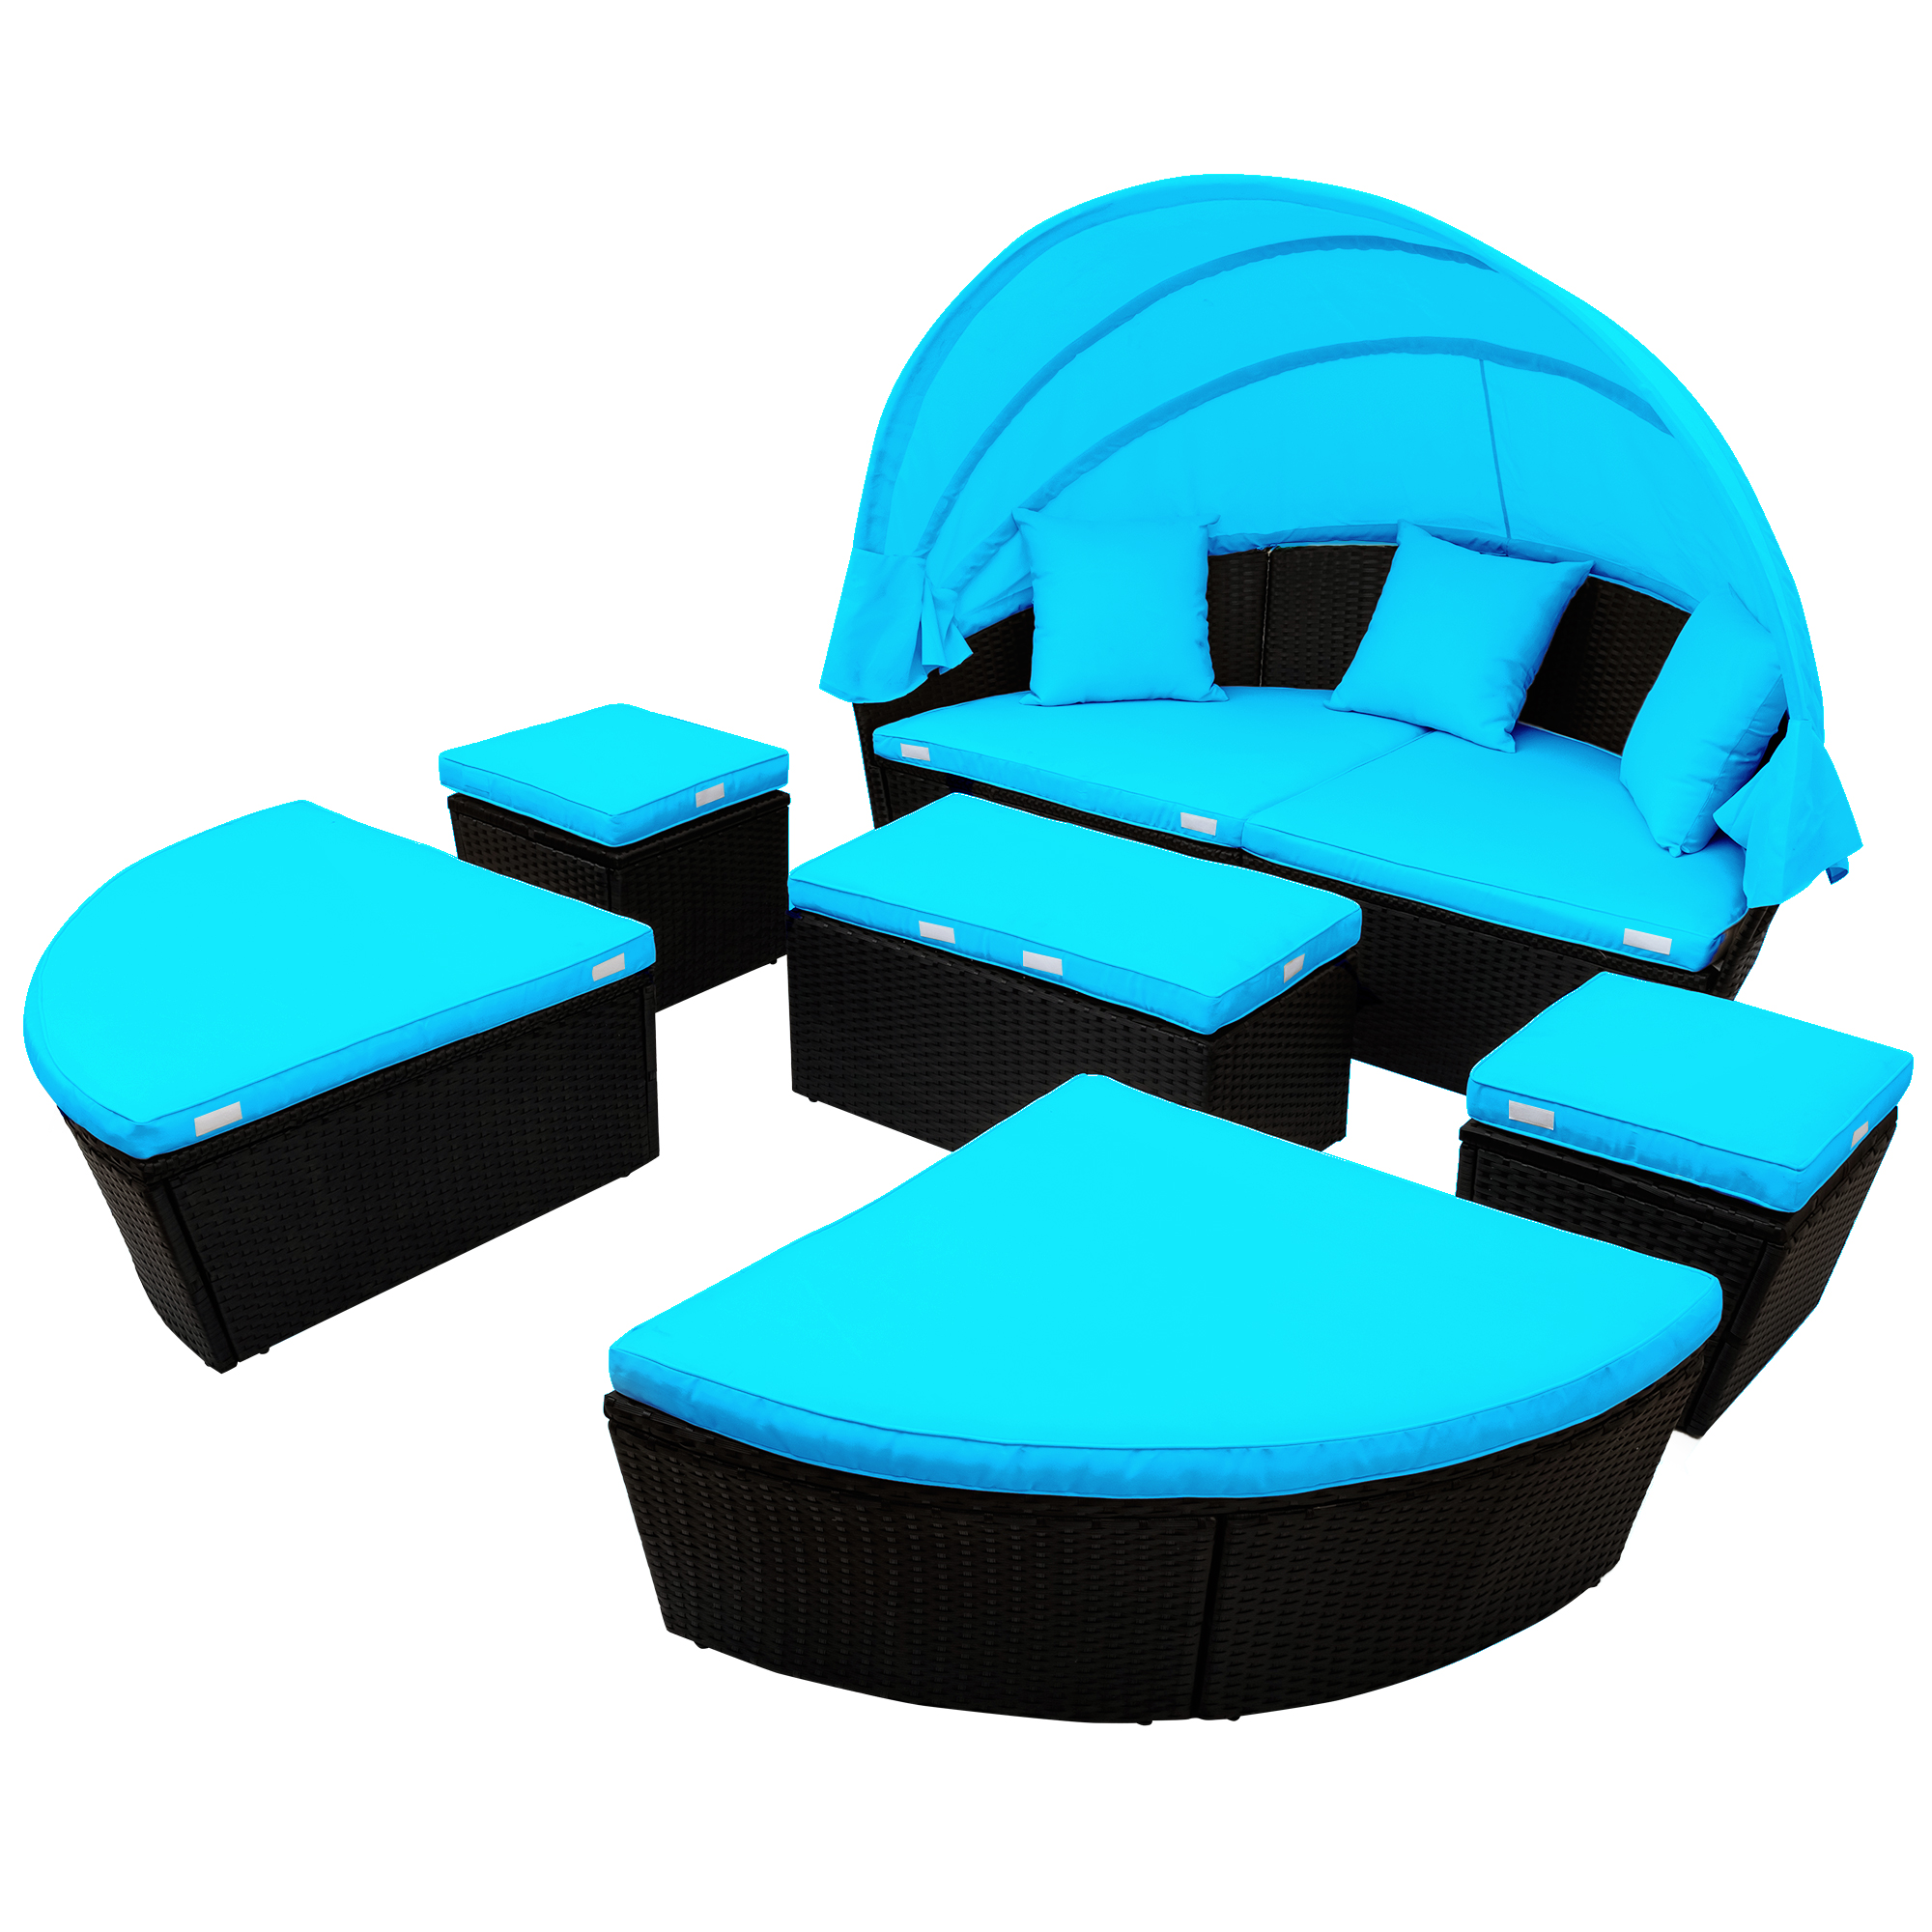 Canddidliike Outdoor Lounge Round Sofa Set w/Blue Cushions for Patio Sectional Furniture - Black Wicker - image 4 of 10